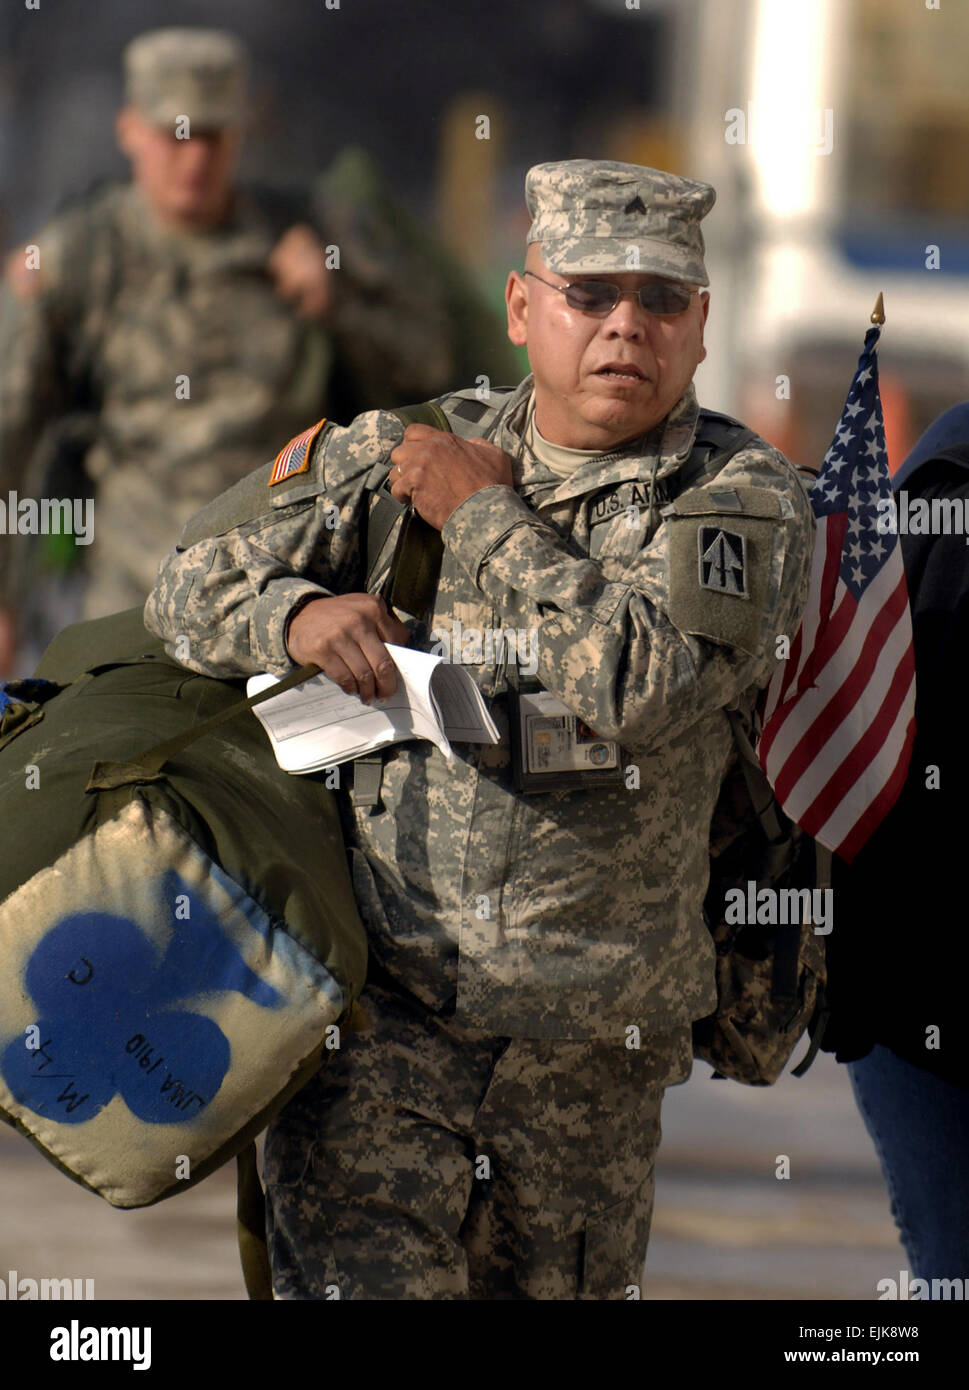 U.S. Army Cpl. Joseph Arevalos, of the 76th Brigade Combat Team, makes his way inside for a going away ceremony Jan. 2, 2008, at the RCA Dome in Indianapolis, Ind. The Indiana National Guard is preparing to deploy its largest amount of Soldiers since World War II with more than 3,400 Soldiers scheduled to depart for Iraq to serve during their 12-month rotation.  Staff Sgt. Russell Klika Stock Photo